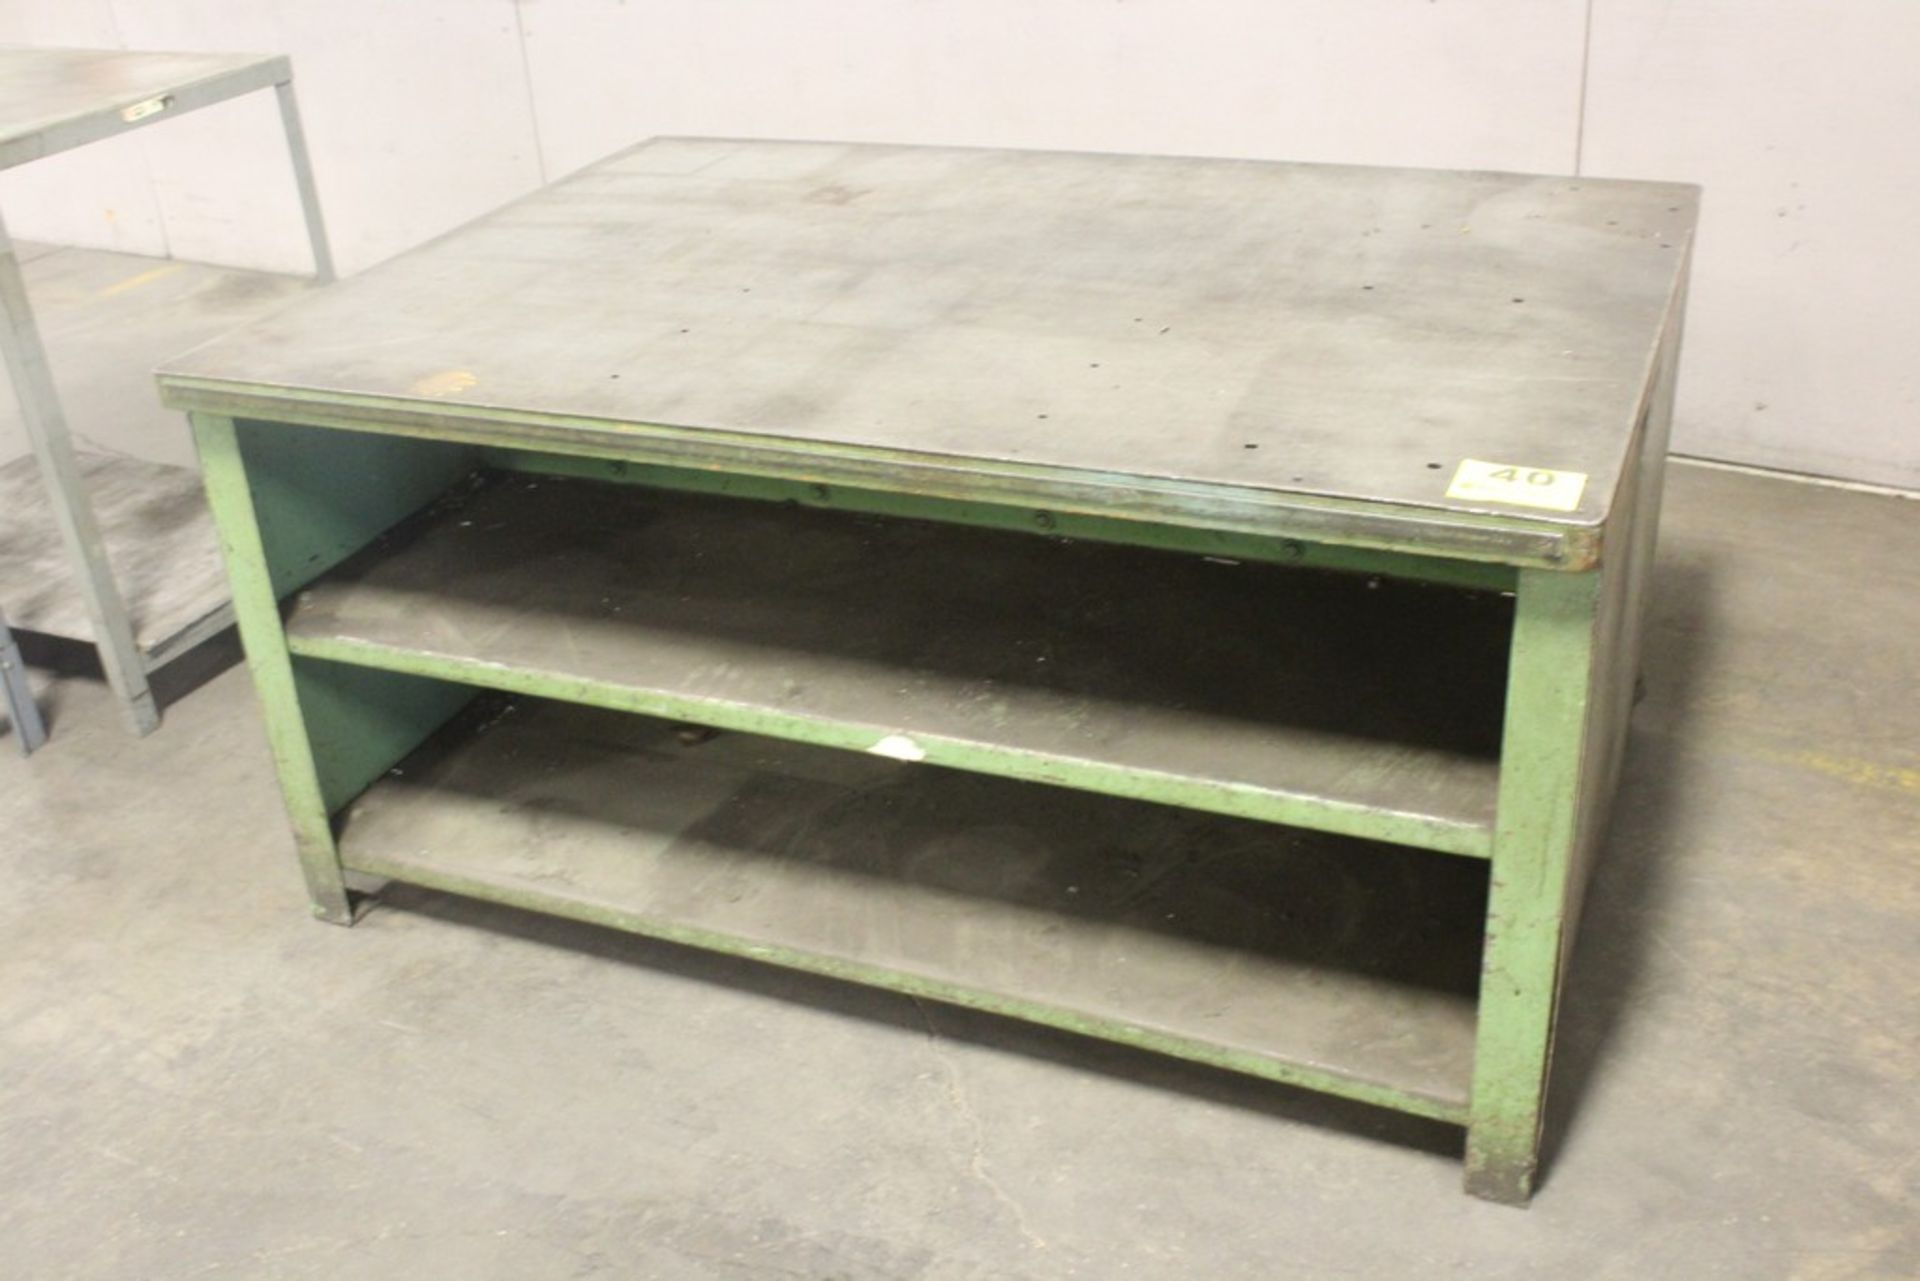 STEEL SHOP TABLE WITH STEEL PLATE TOP AND SHELVES, 30"X 60" X 42"